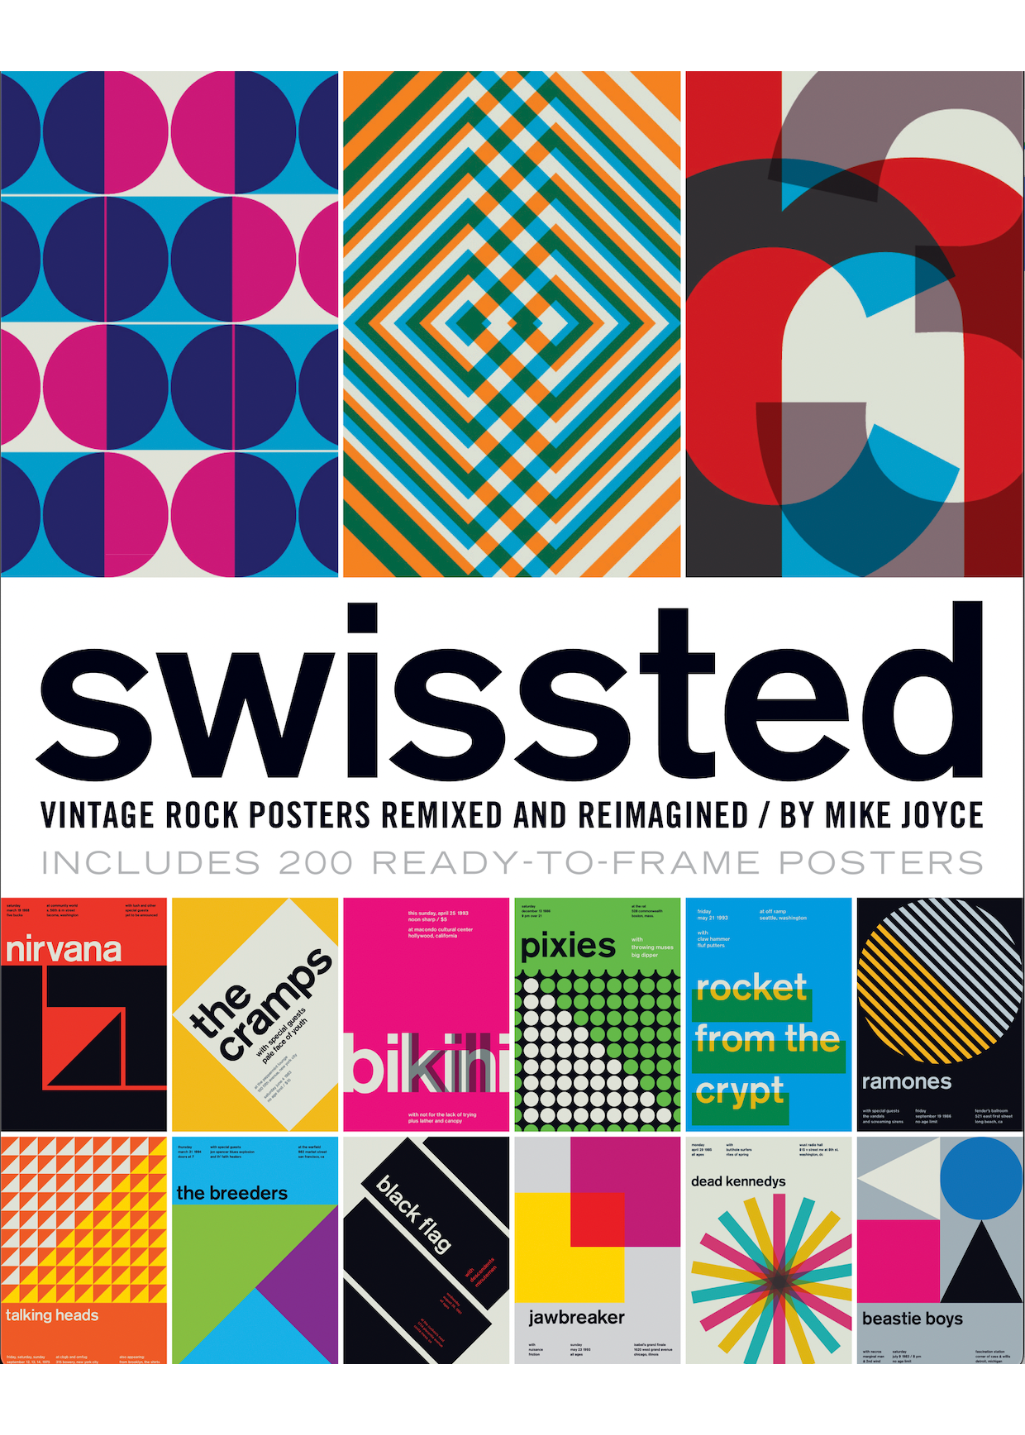 Swissted - Vintage Rock Posters Remixed and Reimagined - Hardpressed Print Studio Inc.